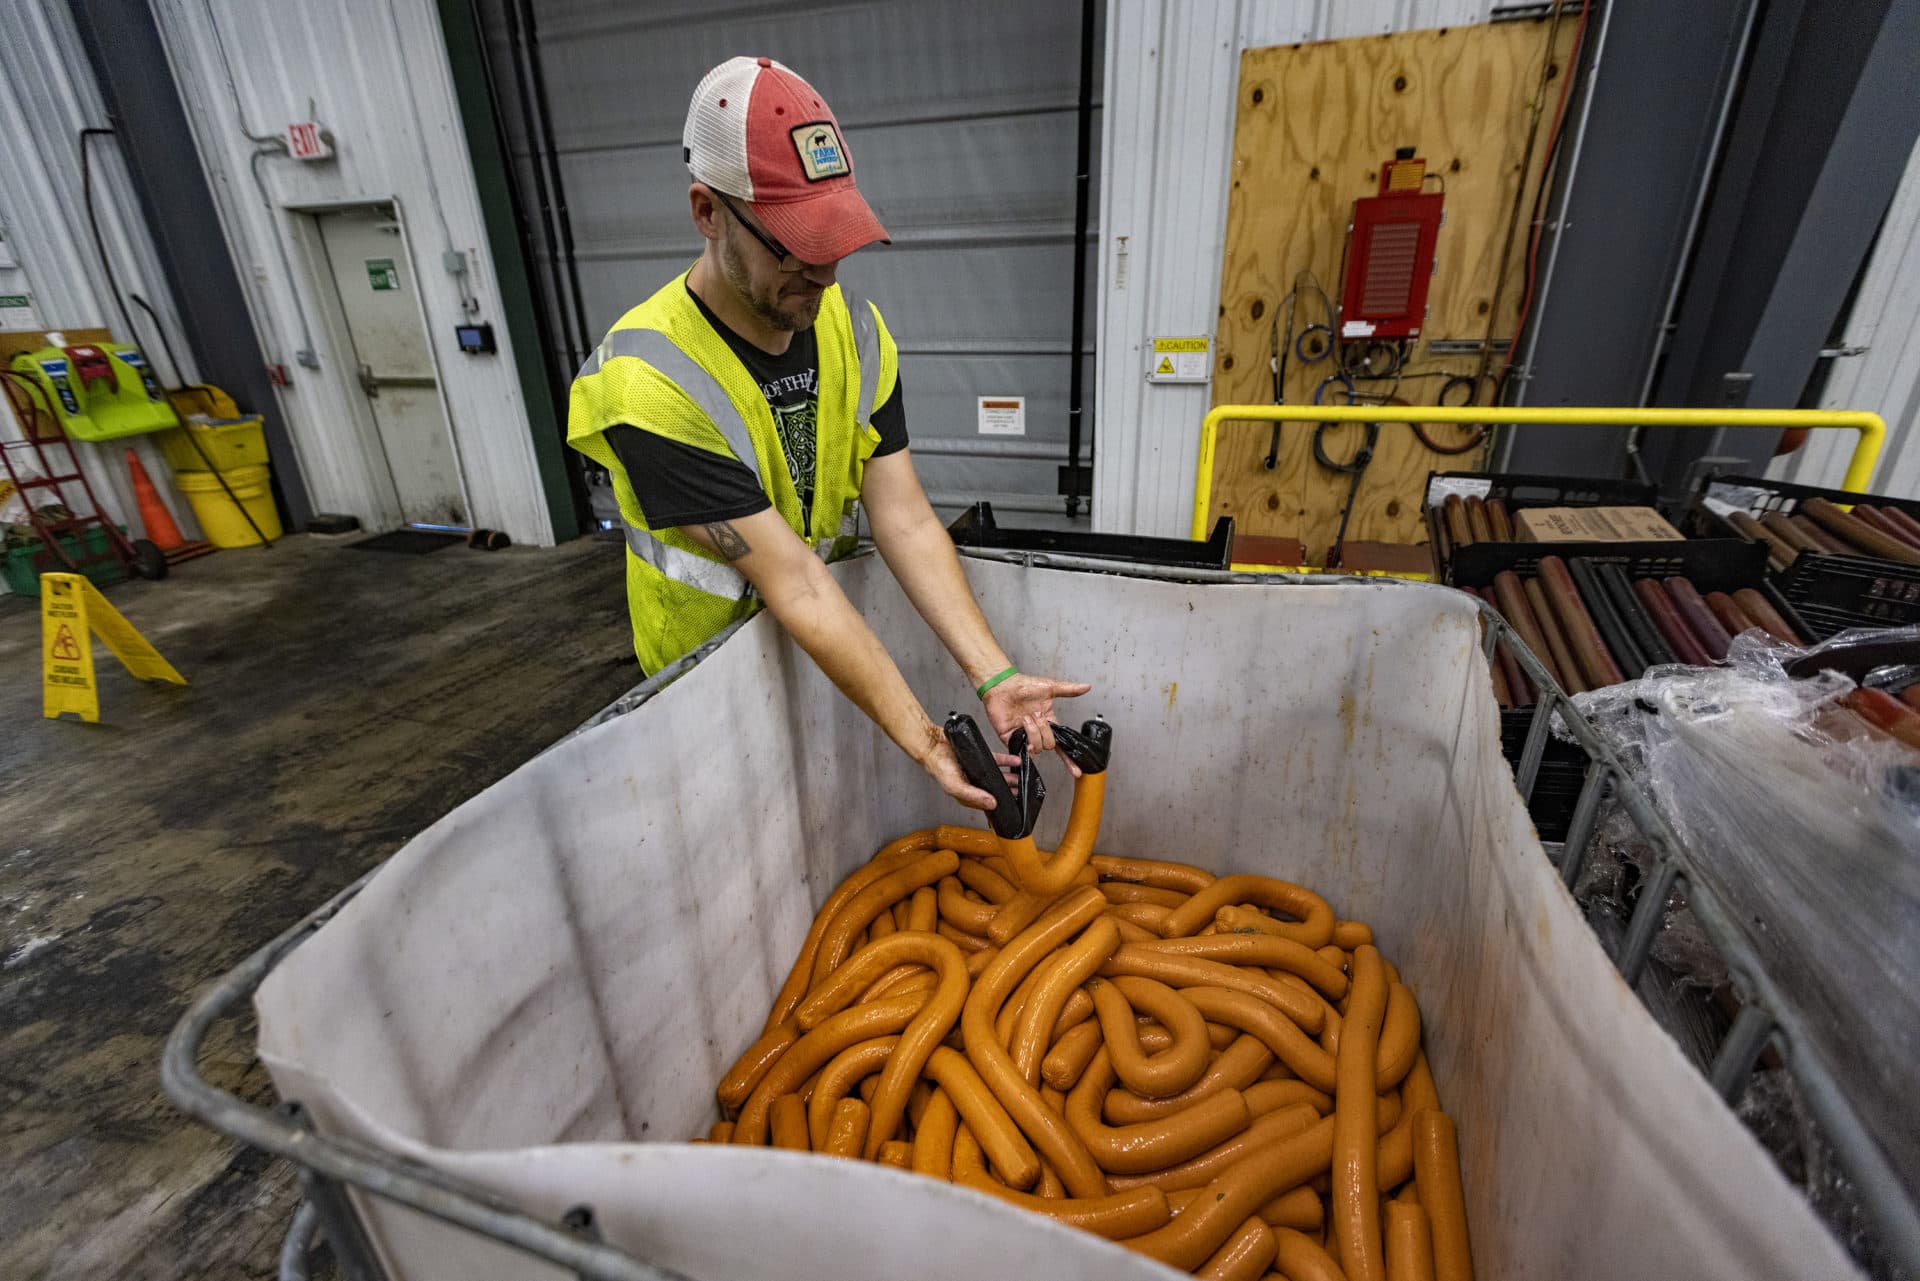 Vegan pepperoni being removed from its packaging before being processed at the Vanguard Renewables Organics Recycling Facility in Agawam. (Jesse Costa/WBUR)